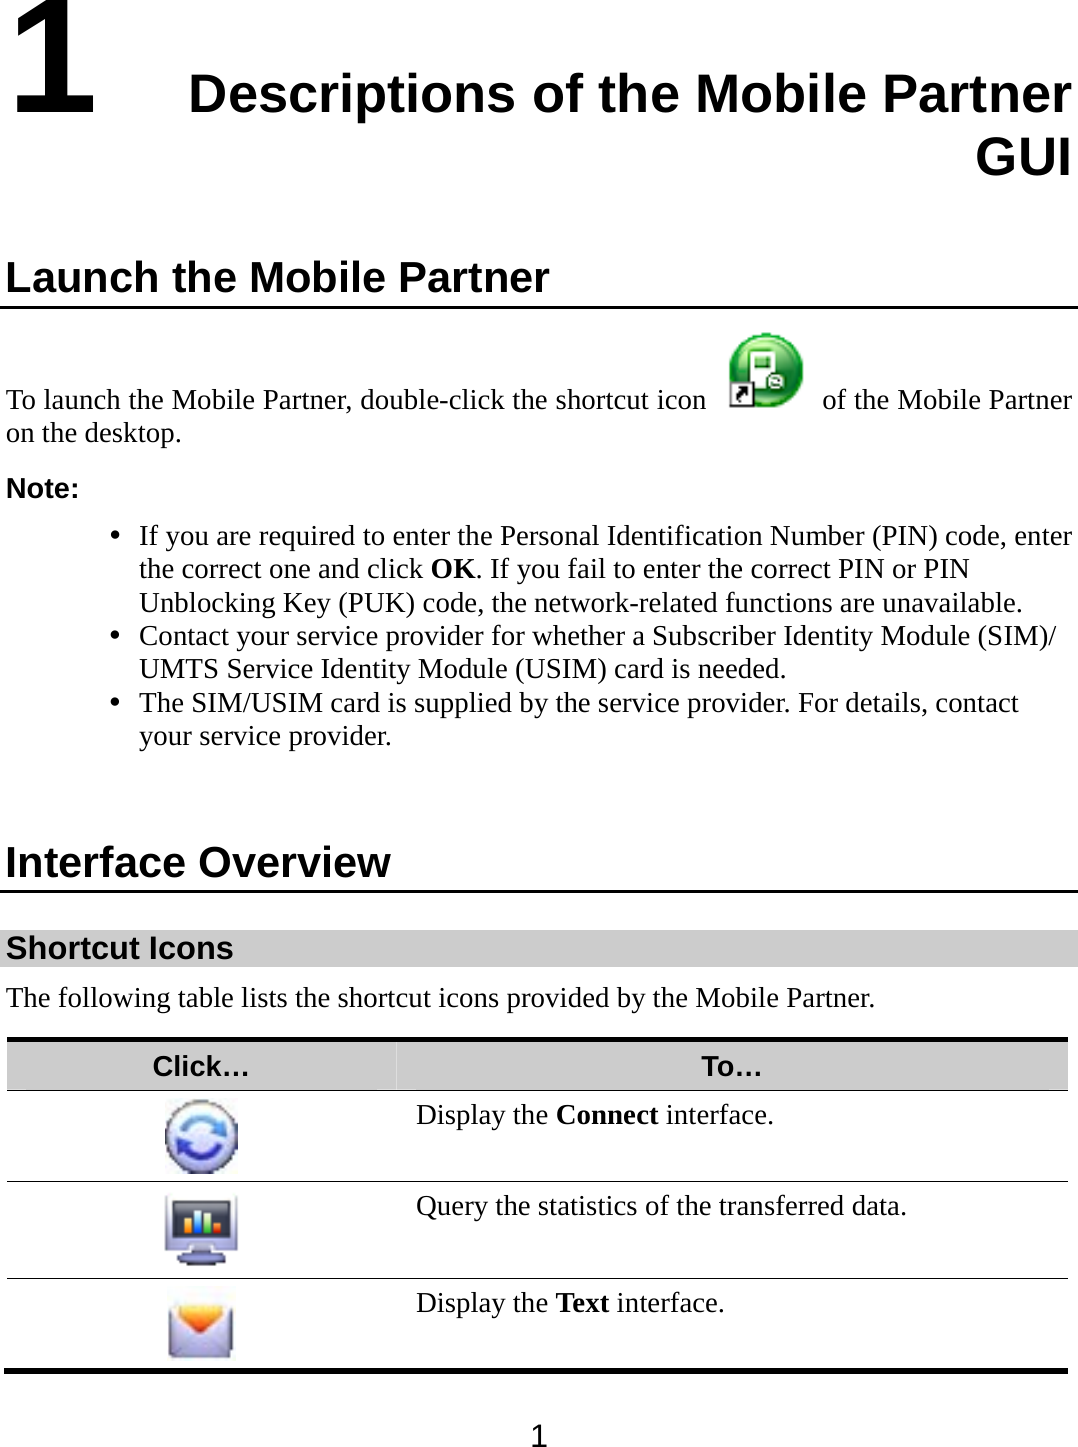  1 1  Descriptions of the Mobile Partner GUI Launch the Mobile Partner To launch the Mobile Partner, double-click the shortcut icon    of the Mobile Partner on the desktop. Note:  If you are required to enter the Personal Identification Number (PIN) code, enter the correct one and click OK. If you fail to enter the correct PIN or PIN Unblocking Key (PUK) code, the network-related functions are unavailable.  Contact your service provider for whether a Subscriber Identity Module (SIM)/ UMTS Service Identity Module (USIM) card is needed.  The SIM/USIM card is supplied by the service provider. For details, contact your service provider.  Interface Overview Shortcut Icons The following table lists the shortcut icons provided by the Mobile Partner. Click…  To…  Display the Connect interface.   Query the statistics of the transferred data.  Display the Text interface. 